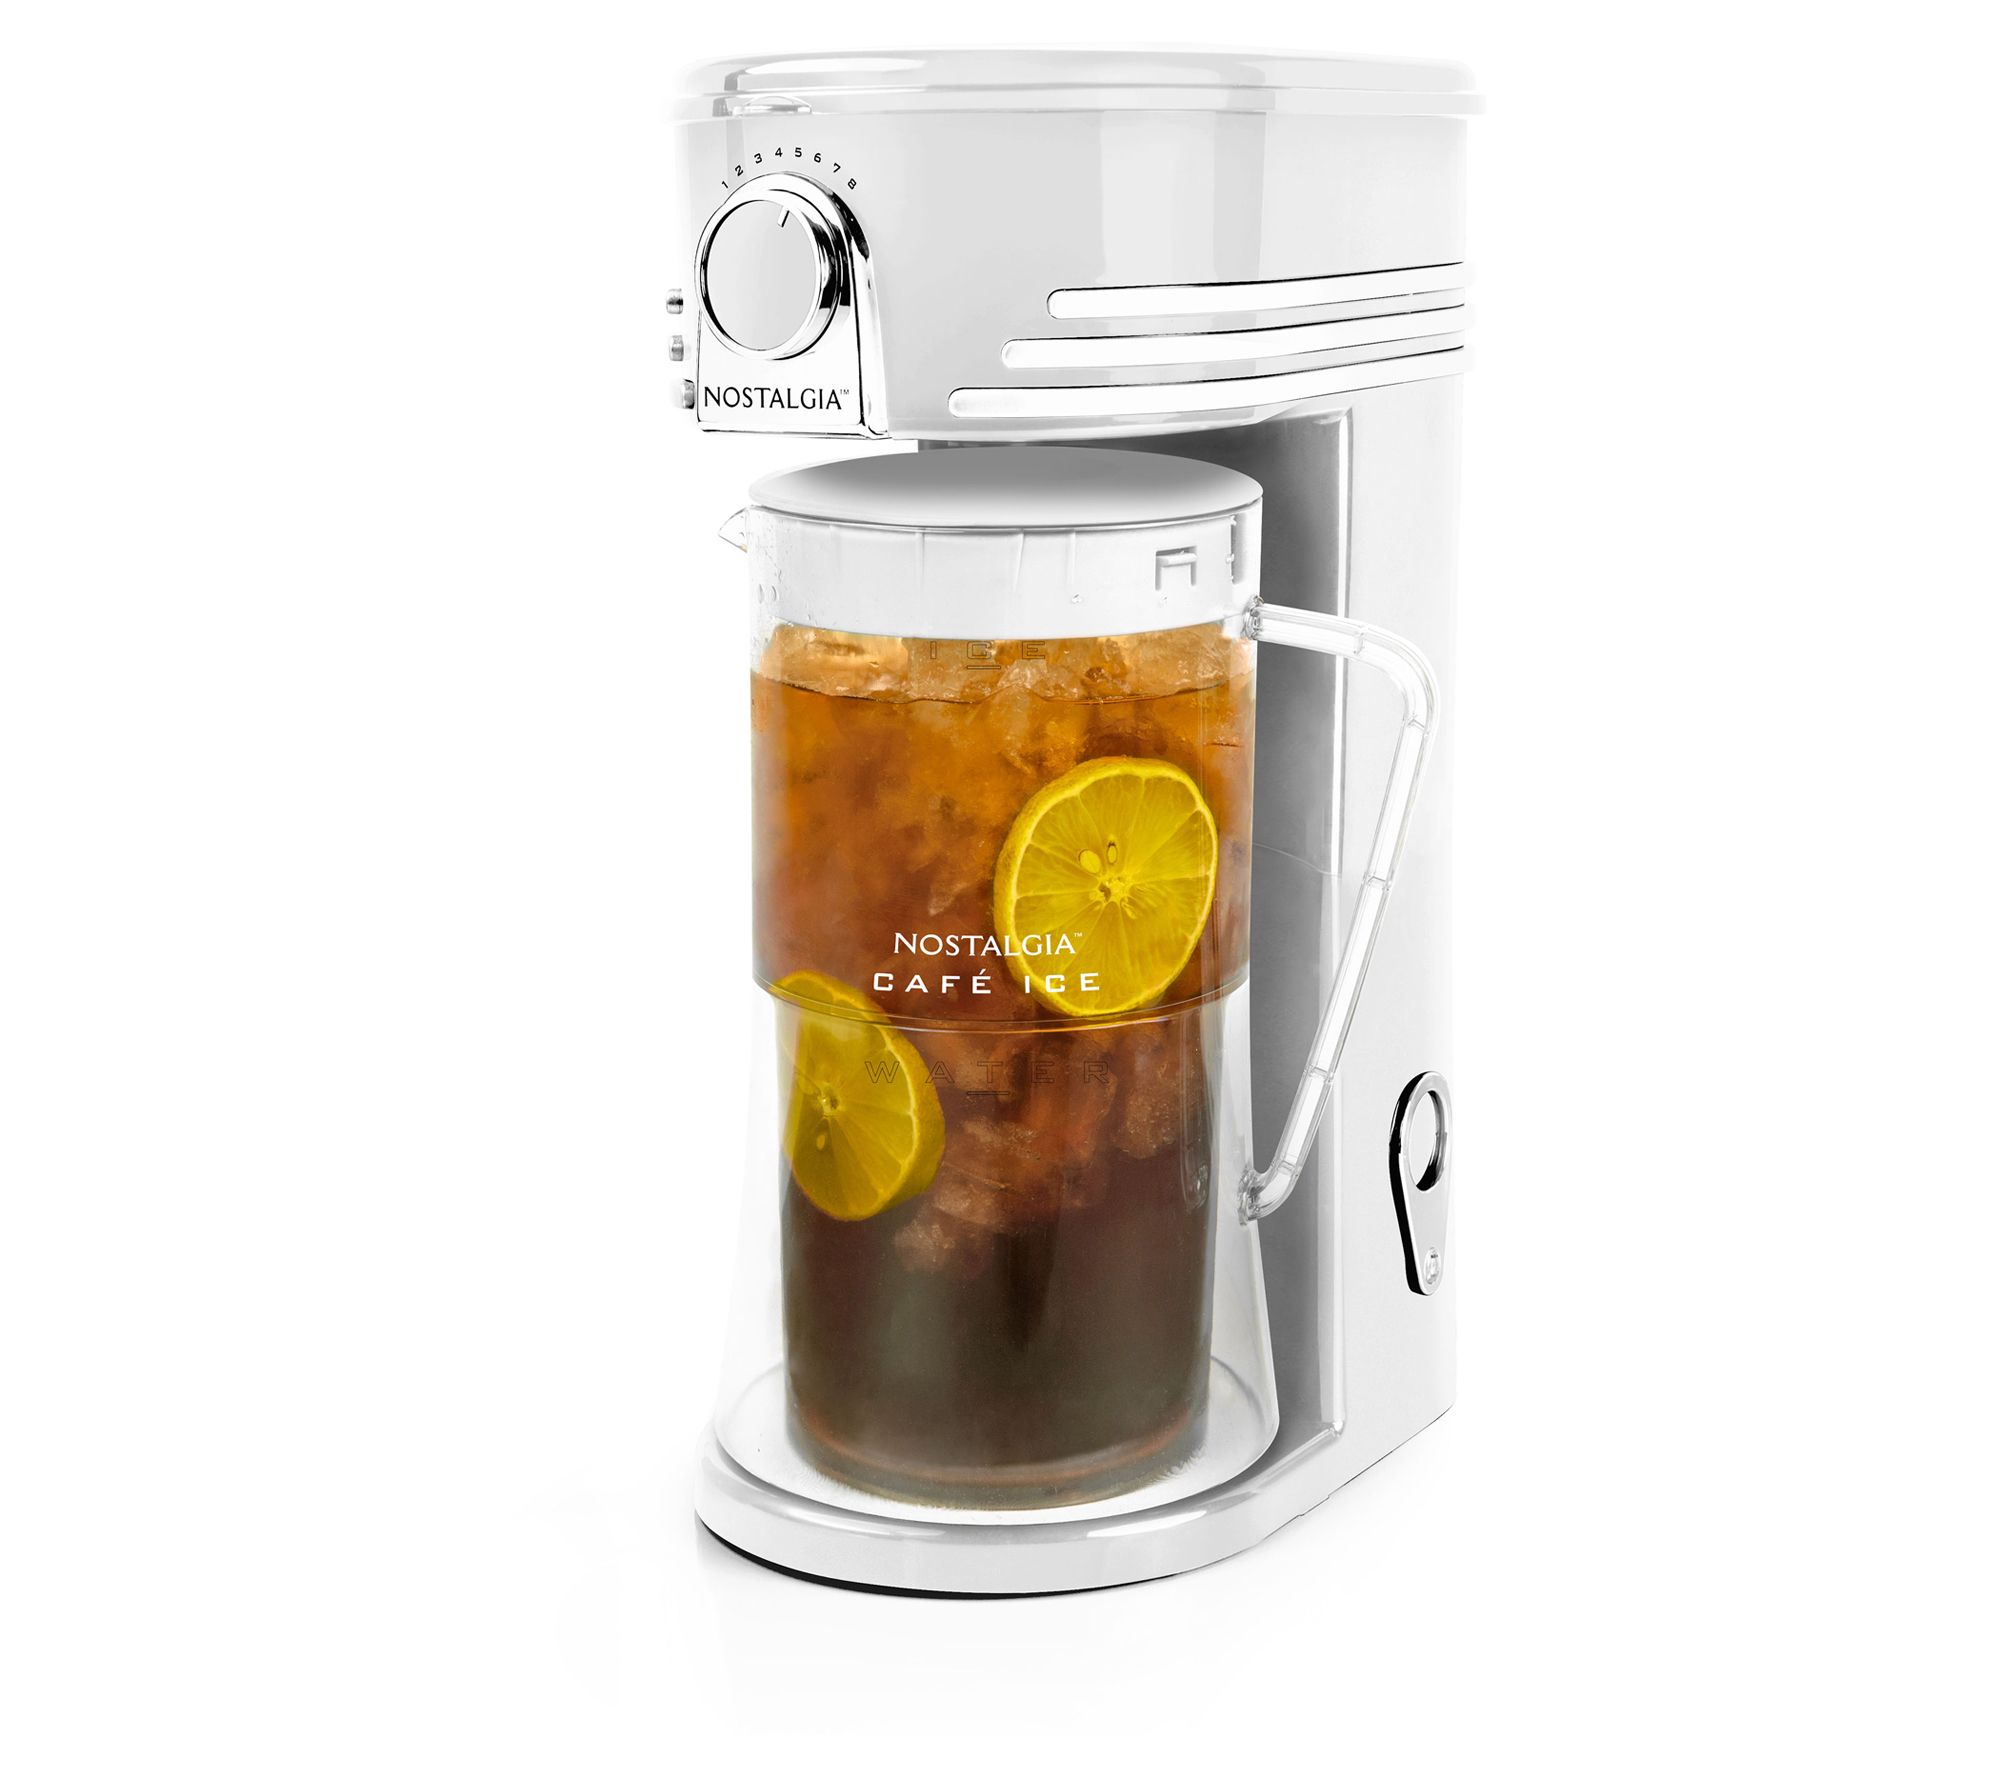 Homecraft 2-Quart Electric Iced Tea Maker for Sweet Tea and Cold